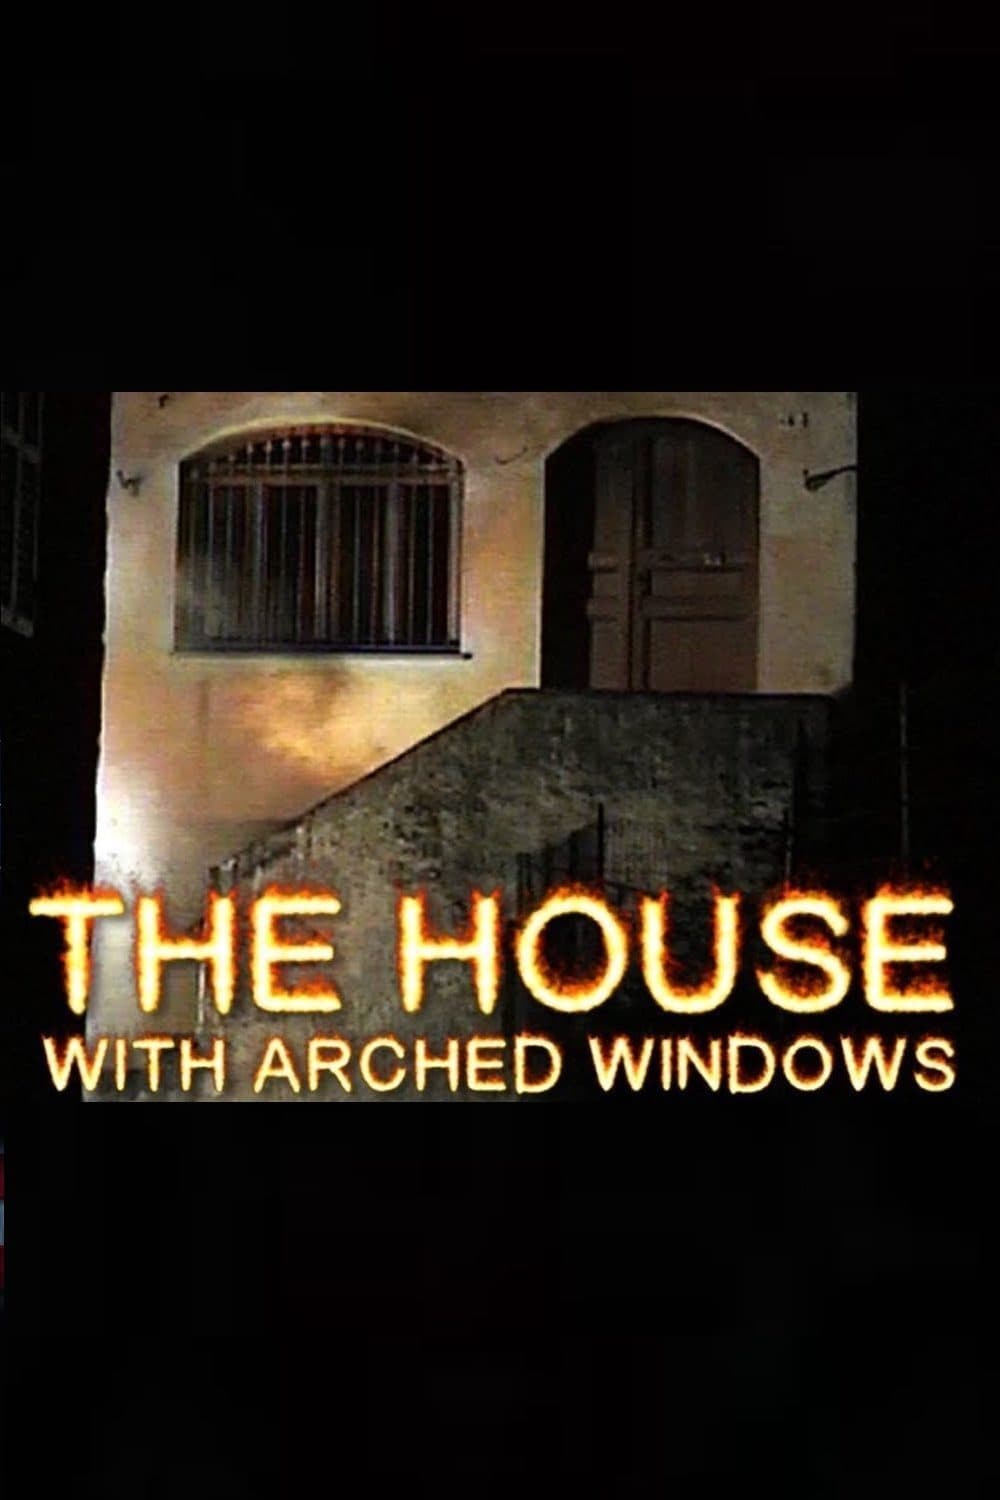 The House with Arched Windows